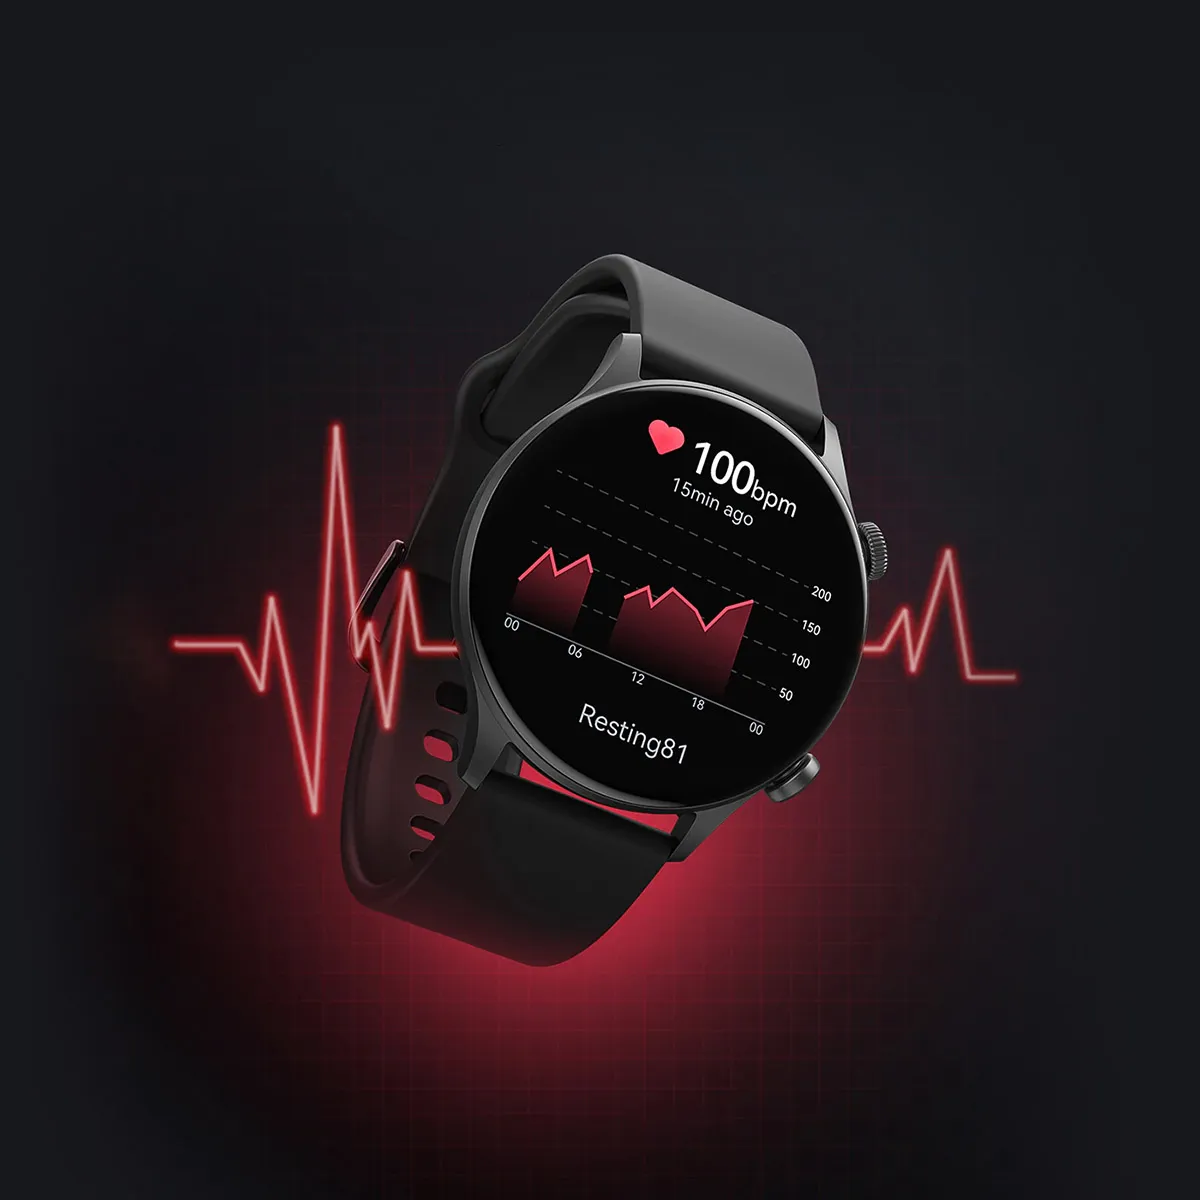 Haylou Solar Plus RT3 heart rate monitoring screen